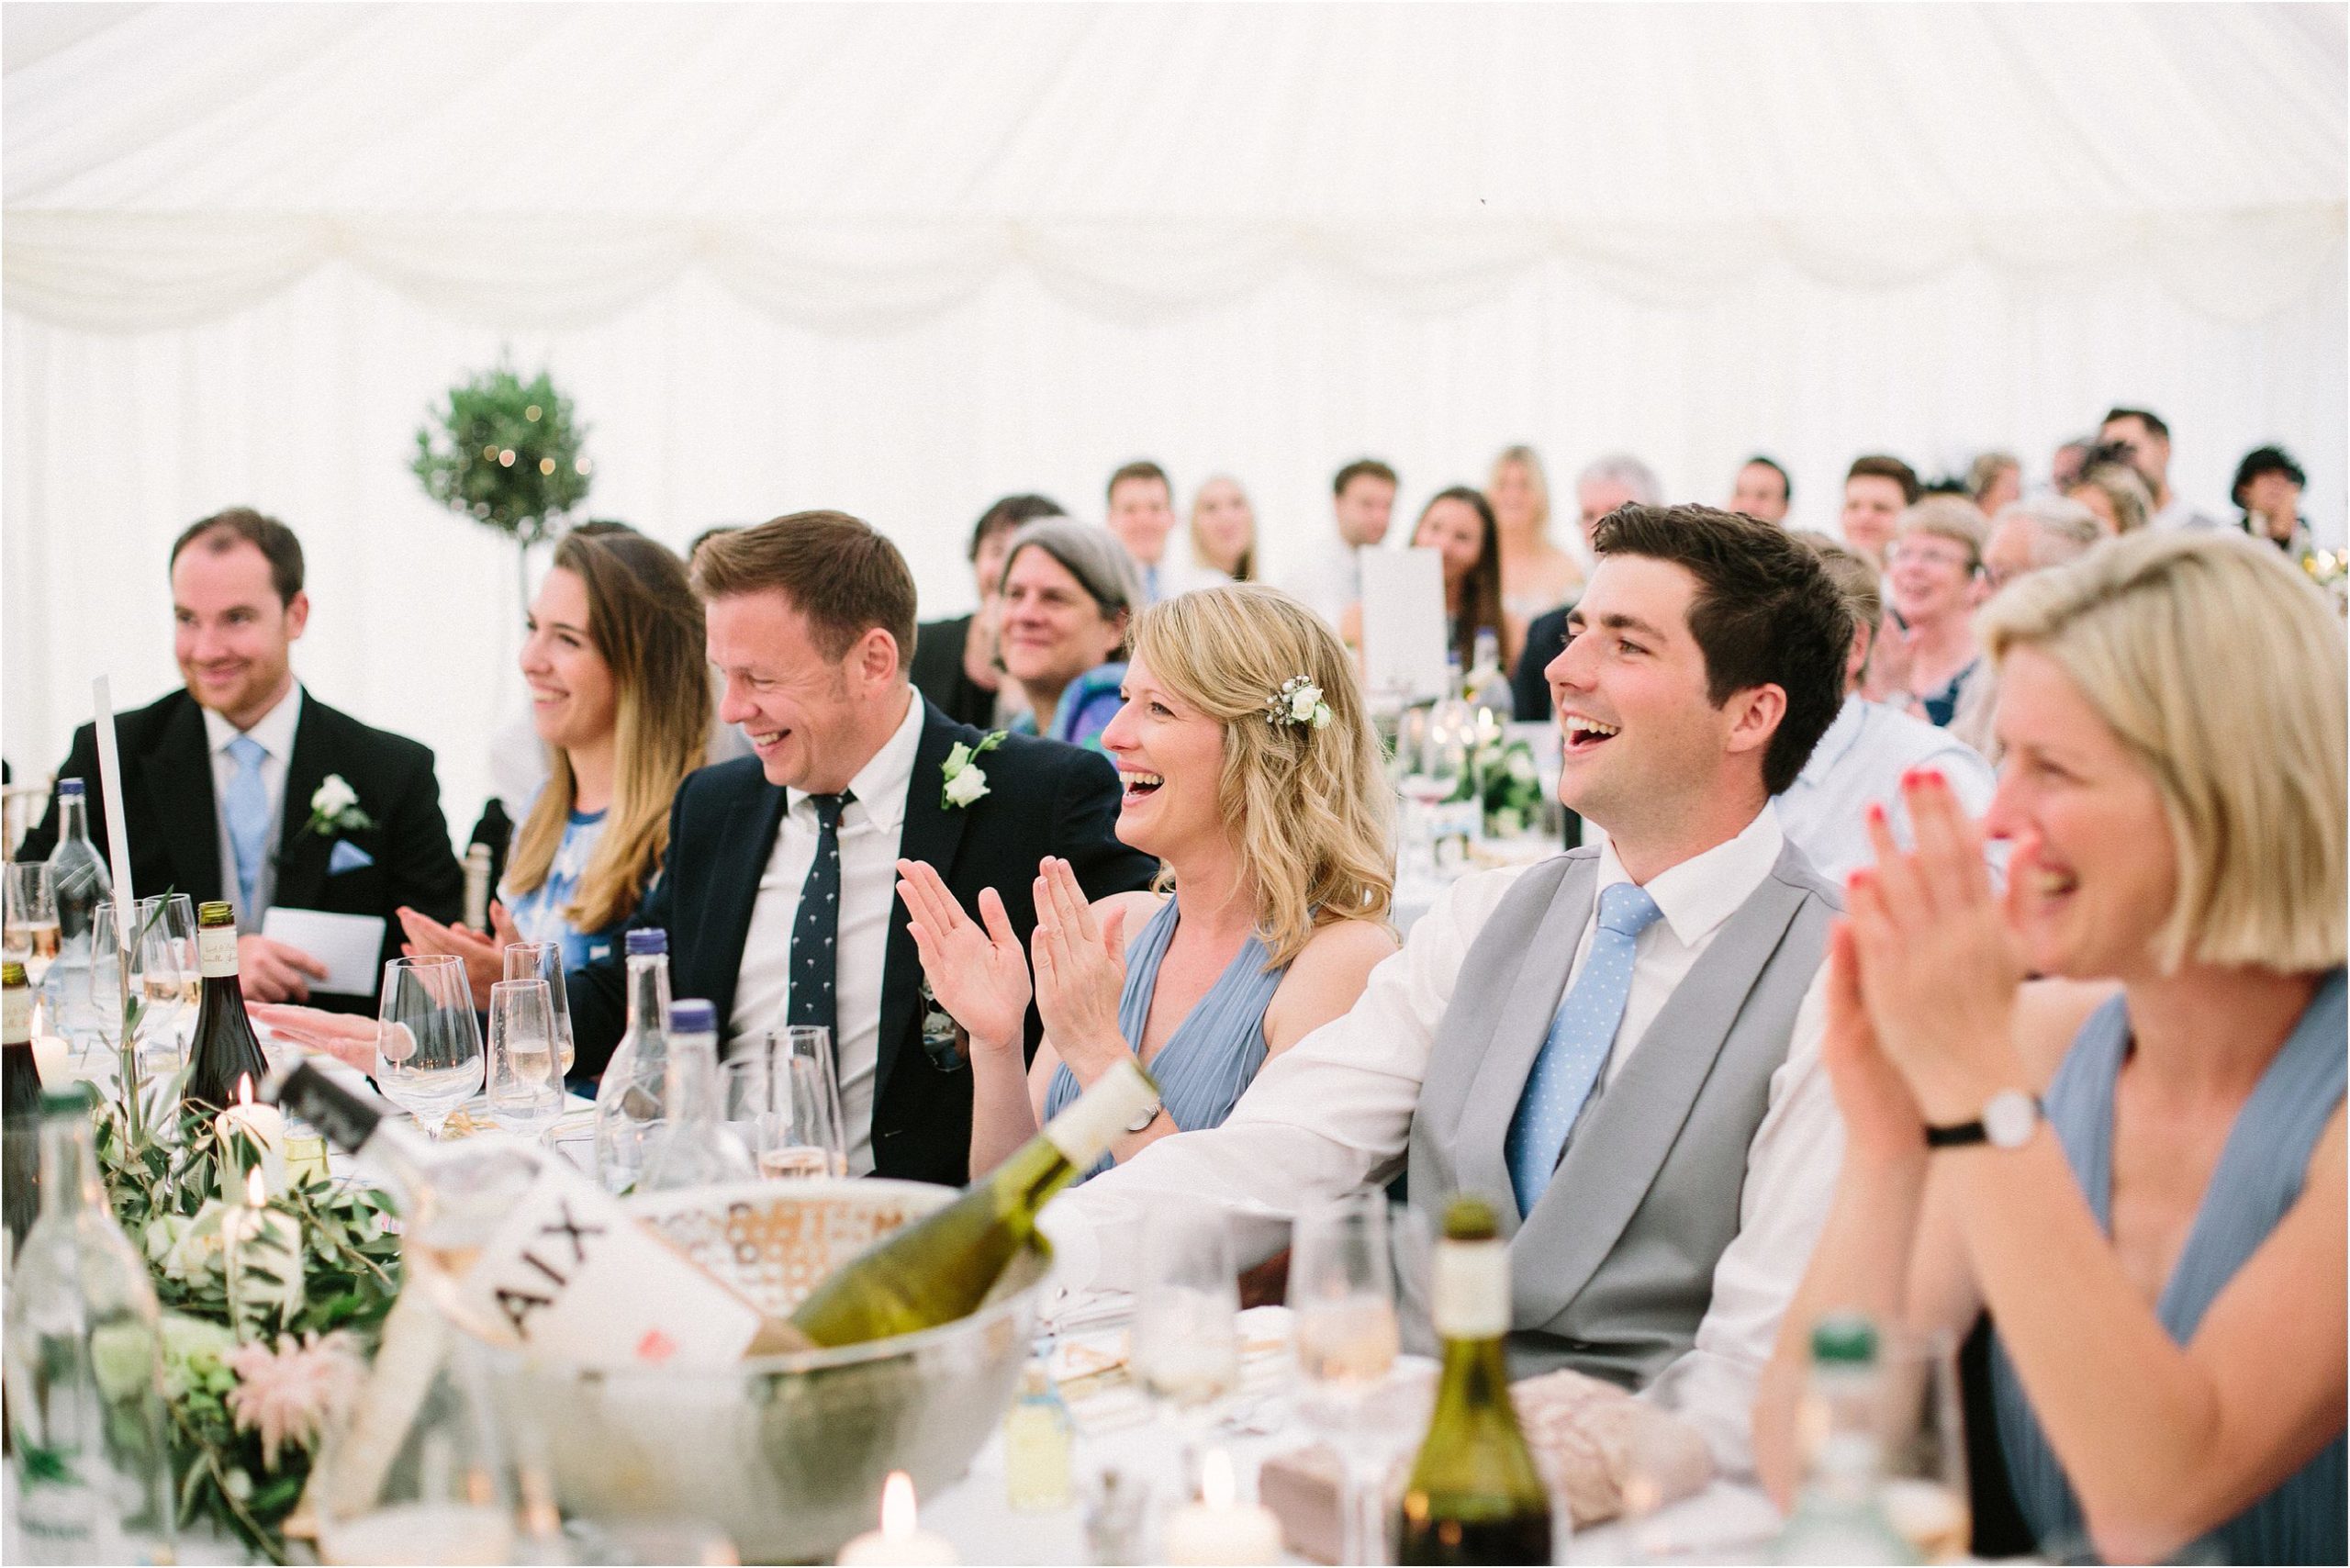 Guests laughing during wedding speeches 